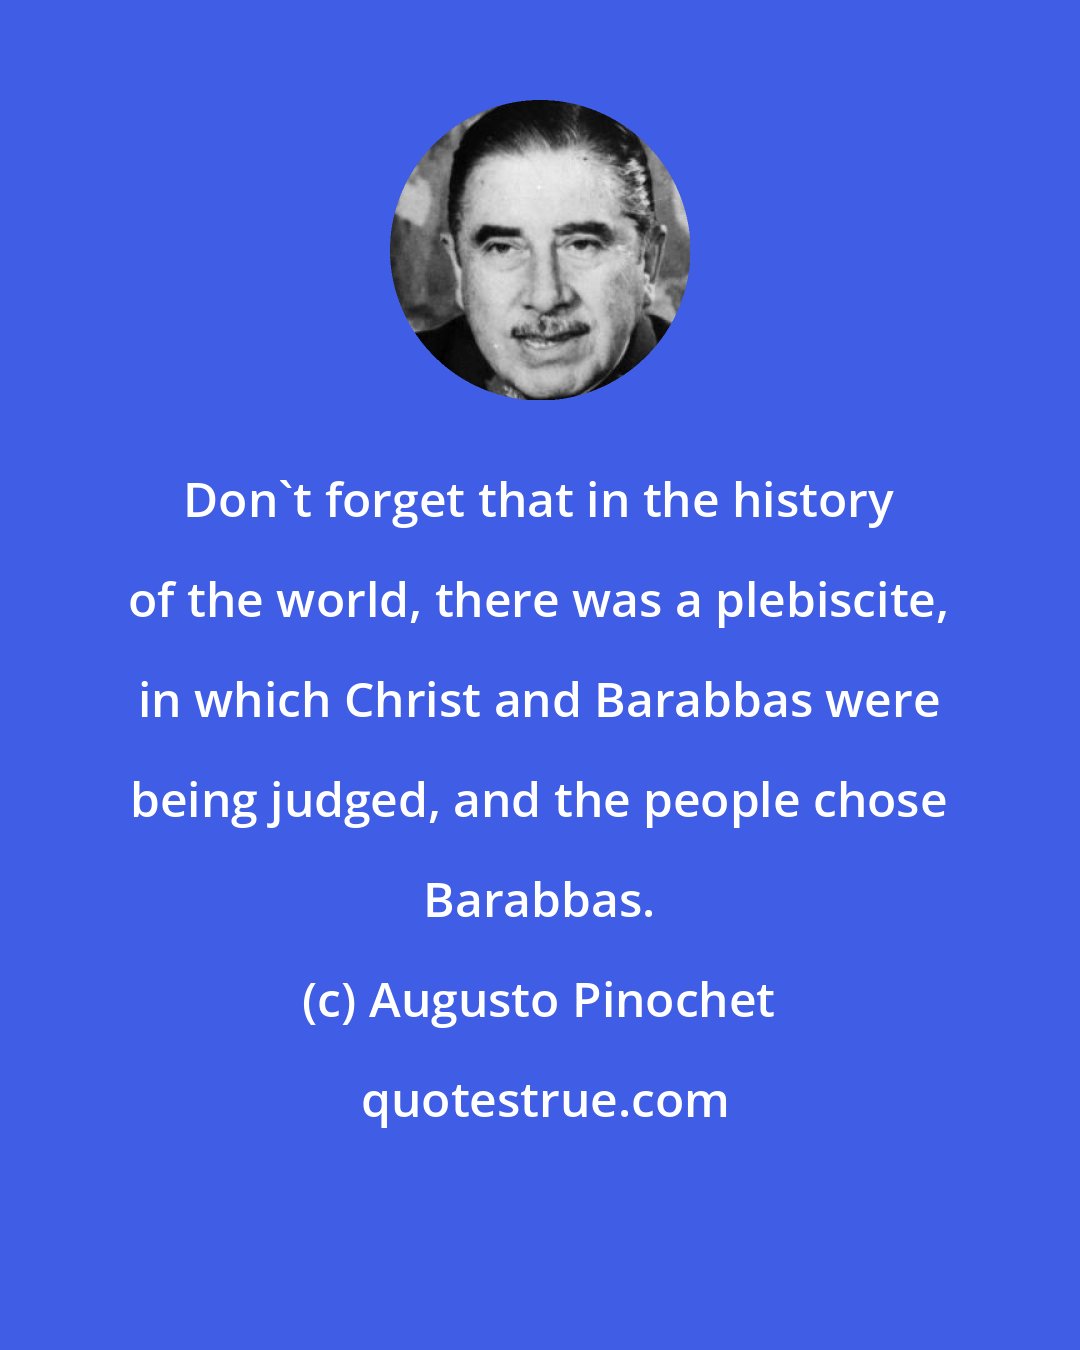 Augusto Pinochet: Don't forget that in the history of the world, there was a plebiscite, in which Christ and Barabbas were being judged, and the people chose Barabbas.